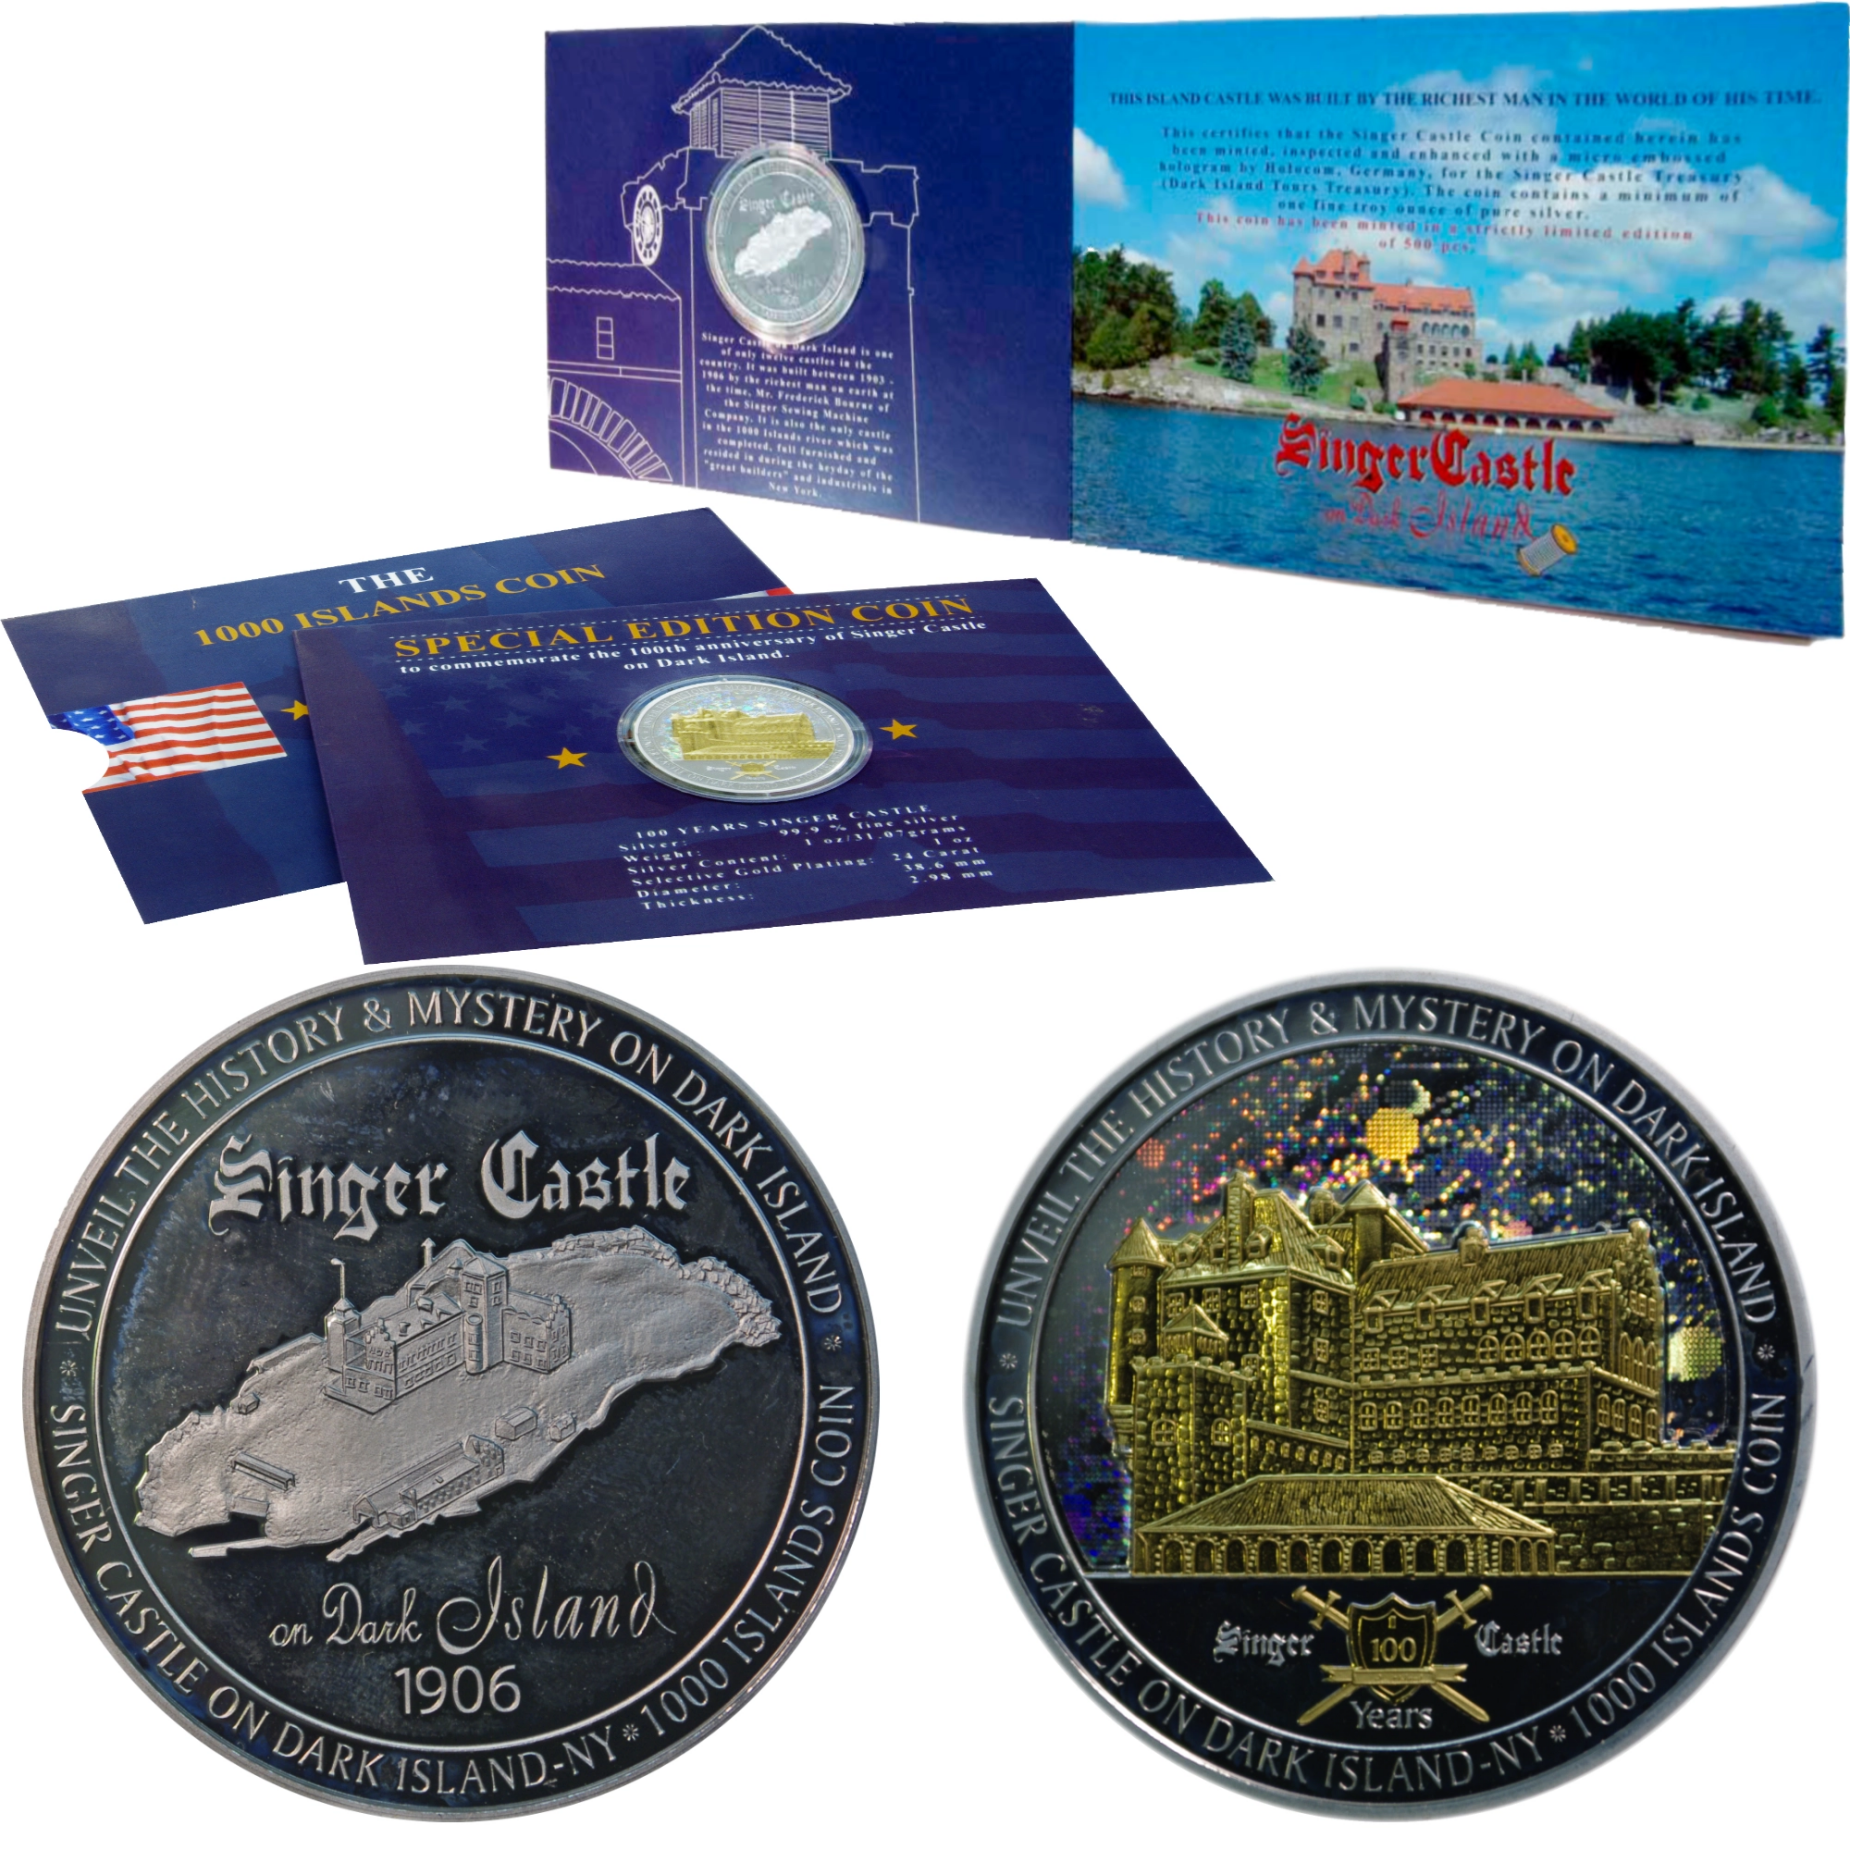 Silver coin with hologram commemorating the centenary of Singer Castle on Dark Island with Schober